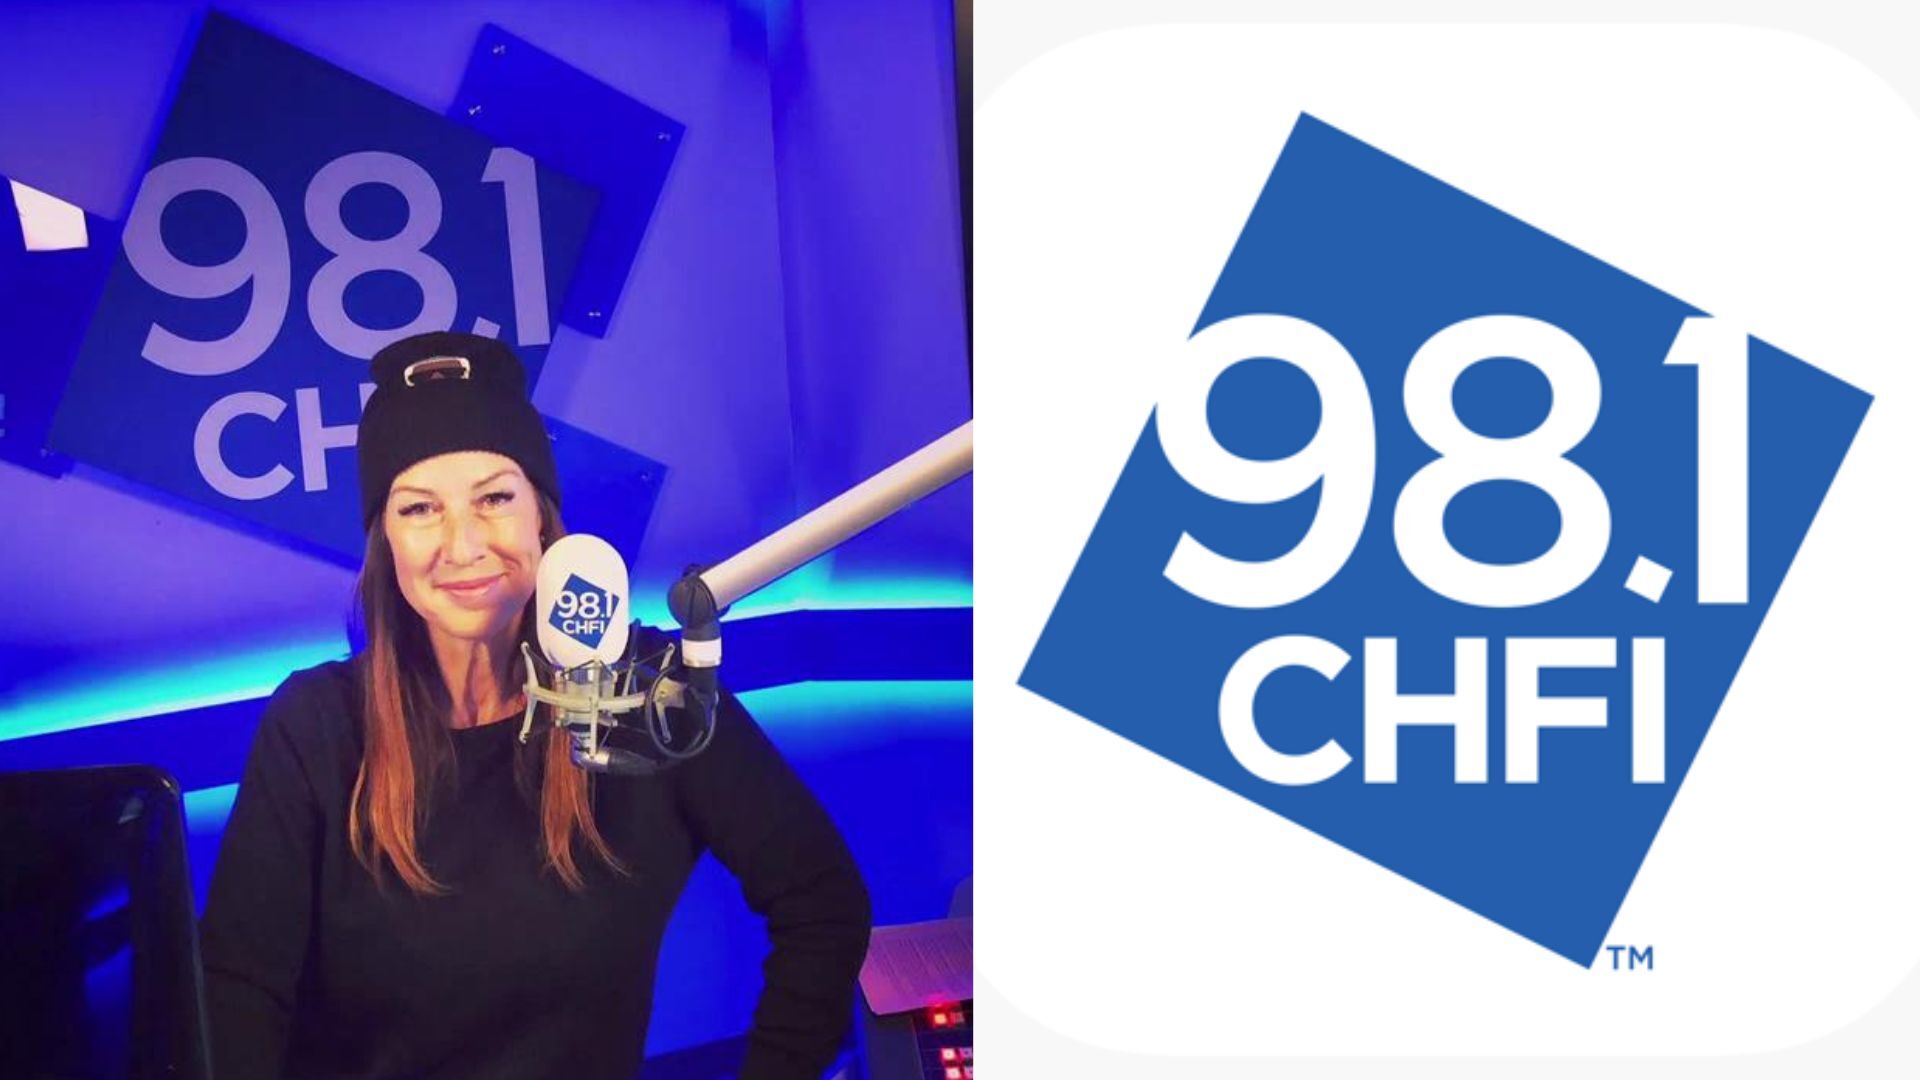 We're celebrating a HUGE milestone for 98.1 CHFI's Michelle Butterly